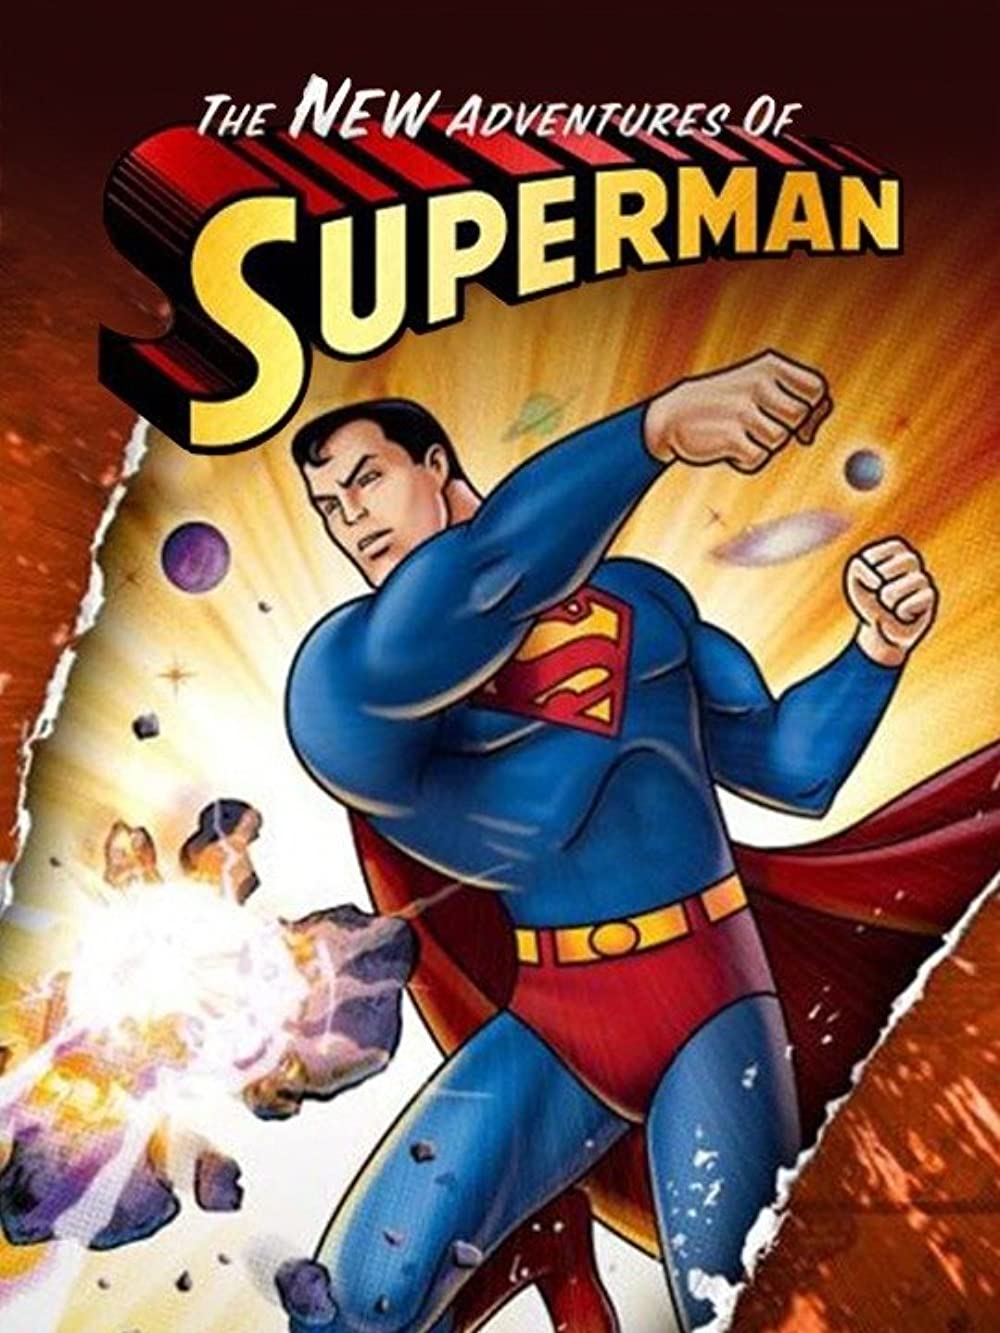 The New Adventures of Superman (1966)